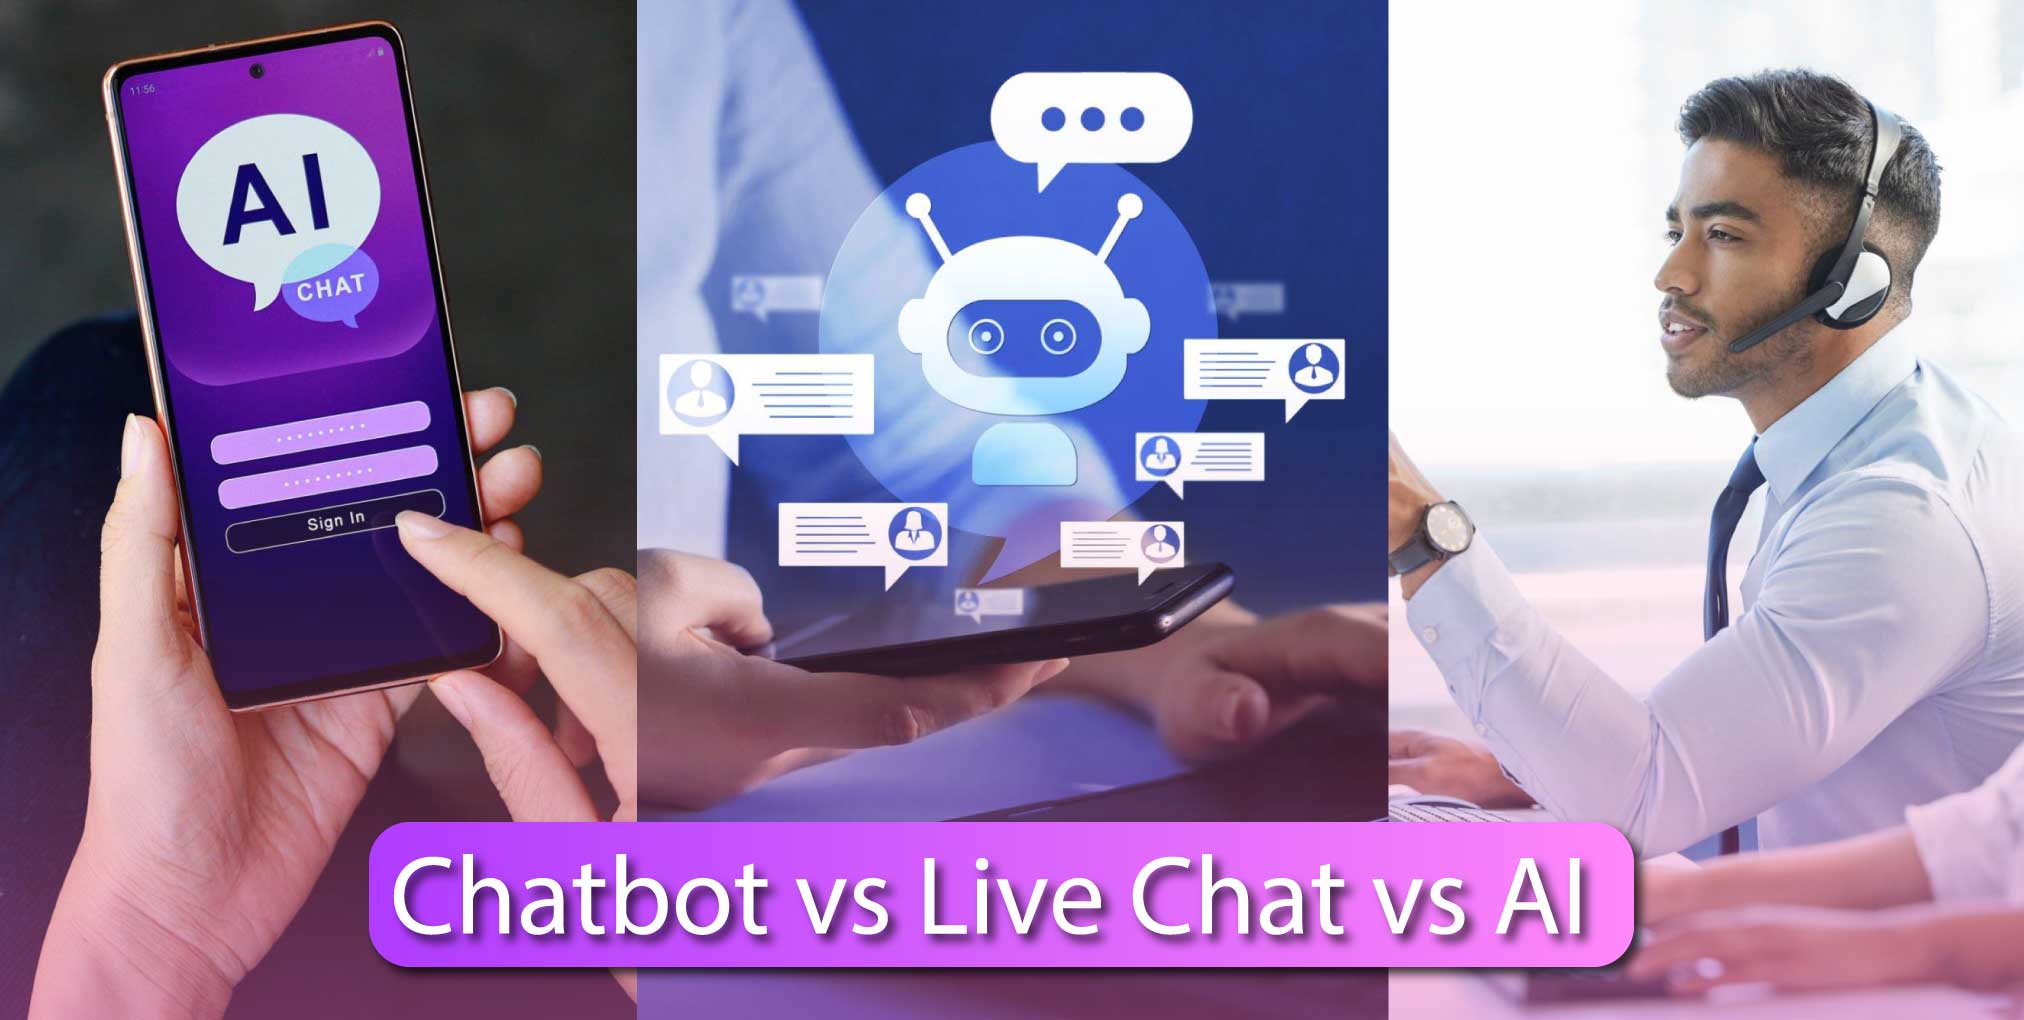 Chatbot vs Live Chat vs AI: Which Is the Best Solution for Your Business?